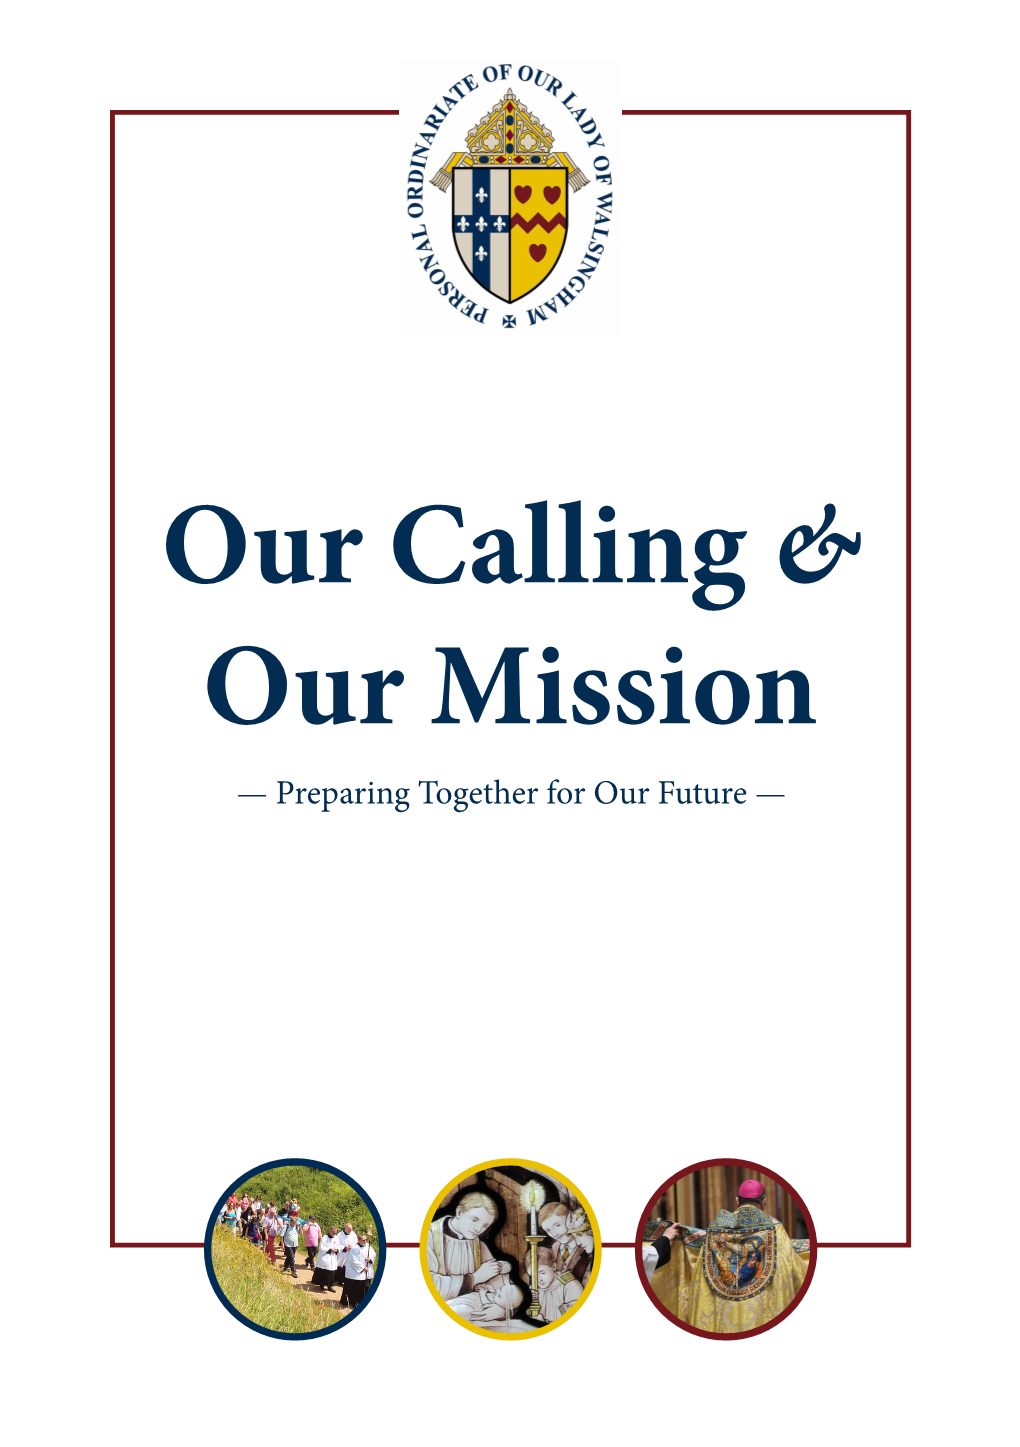 191030 1810 FINAL Our Calling & Our Mission